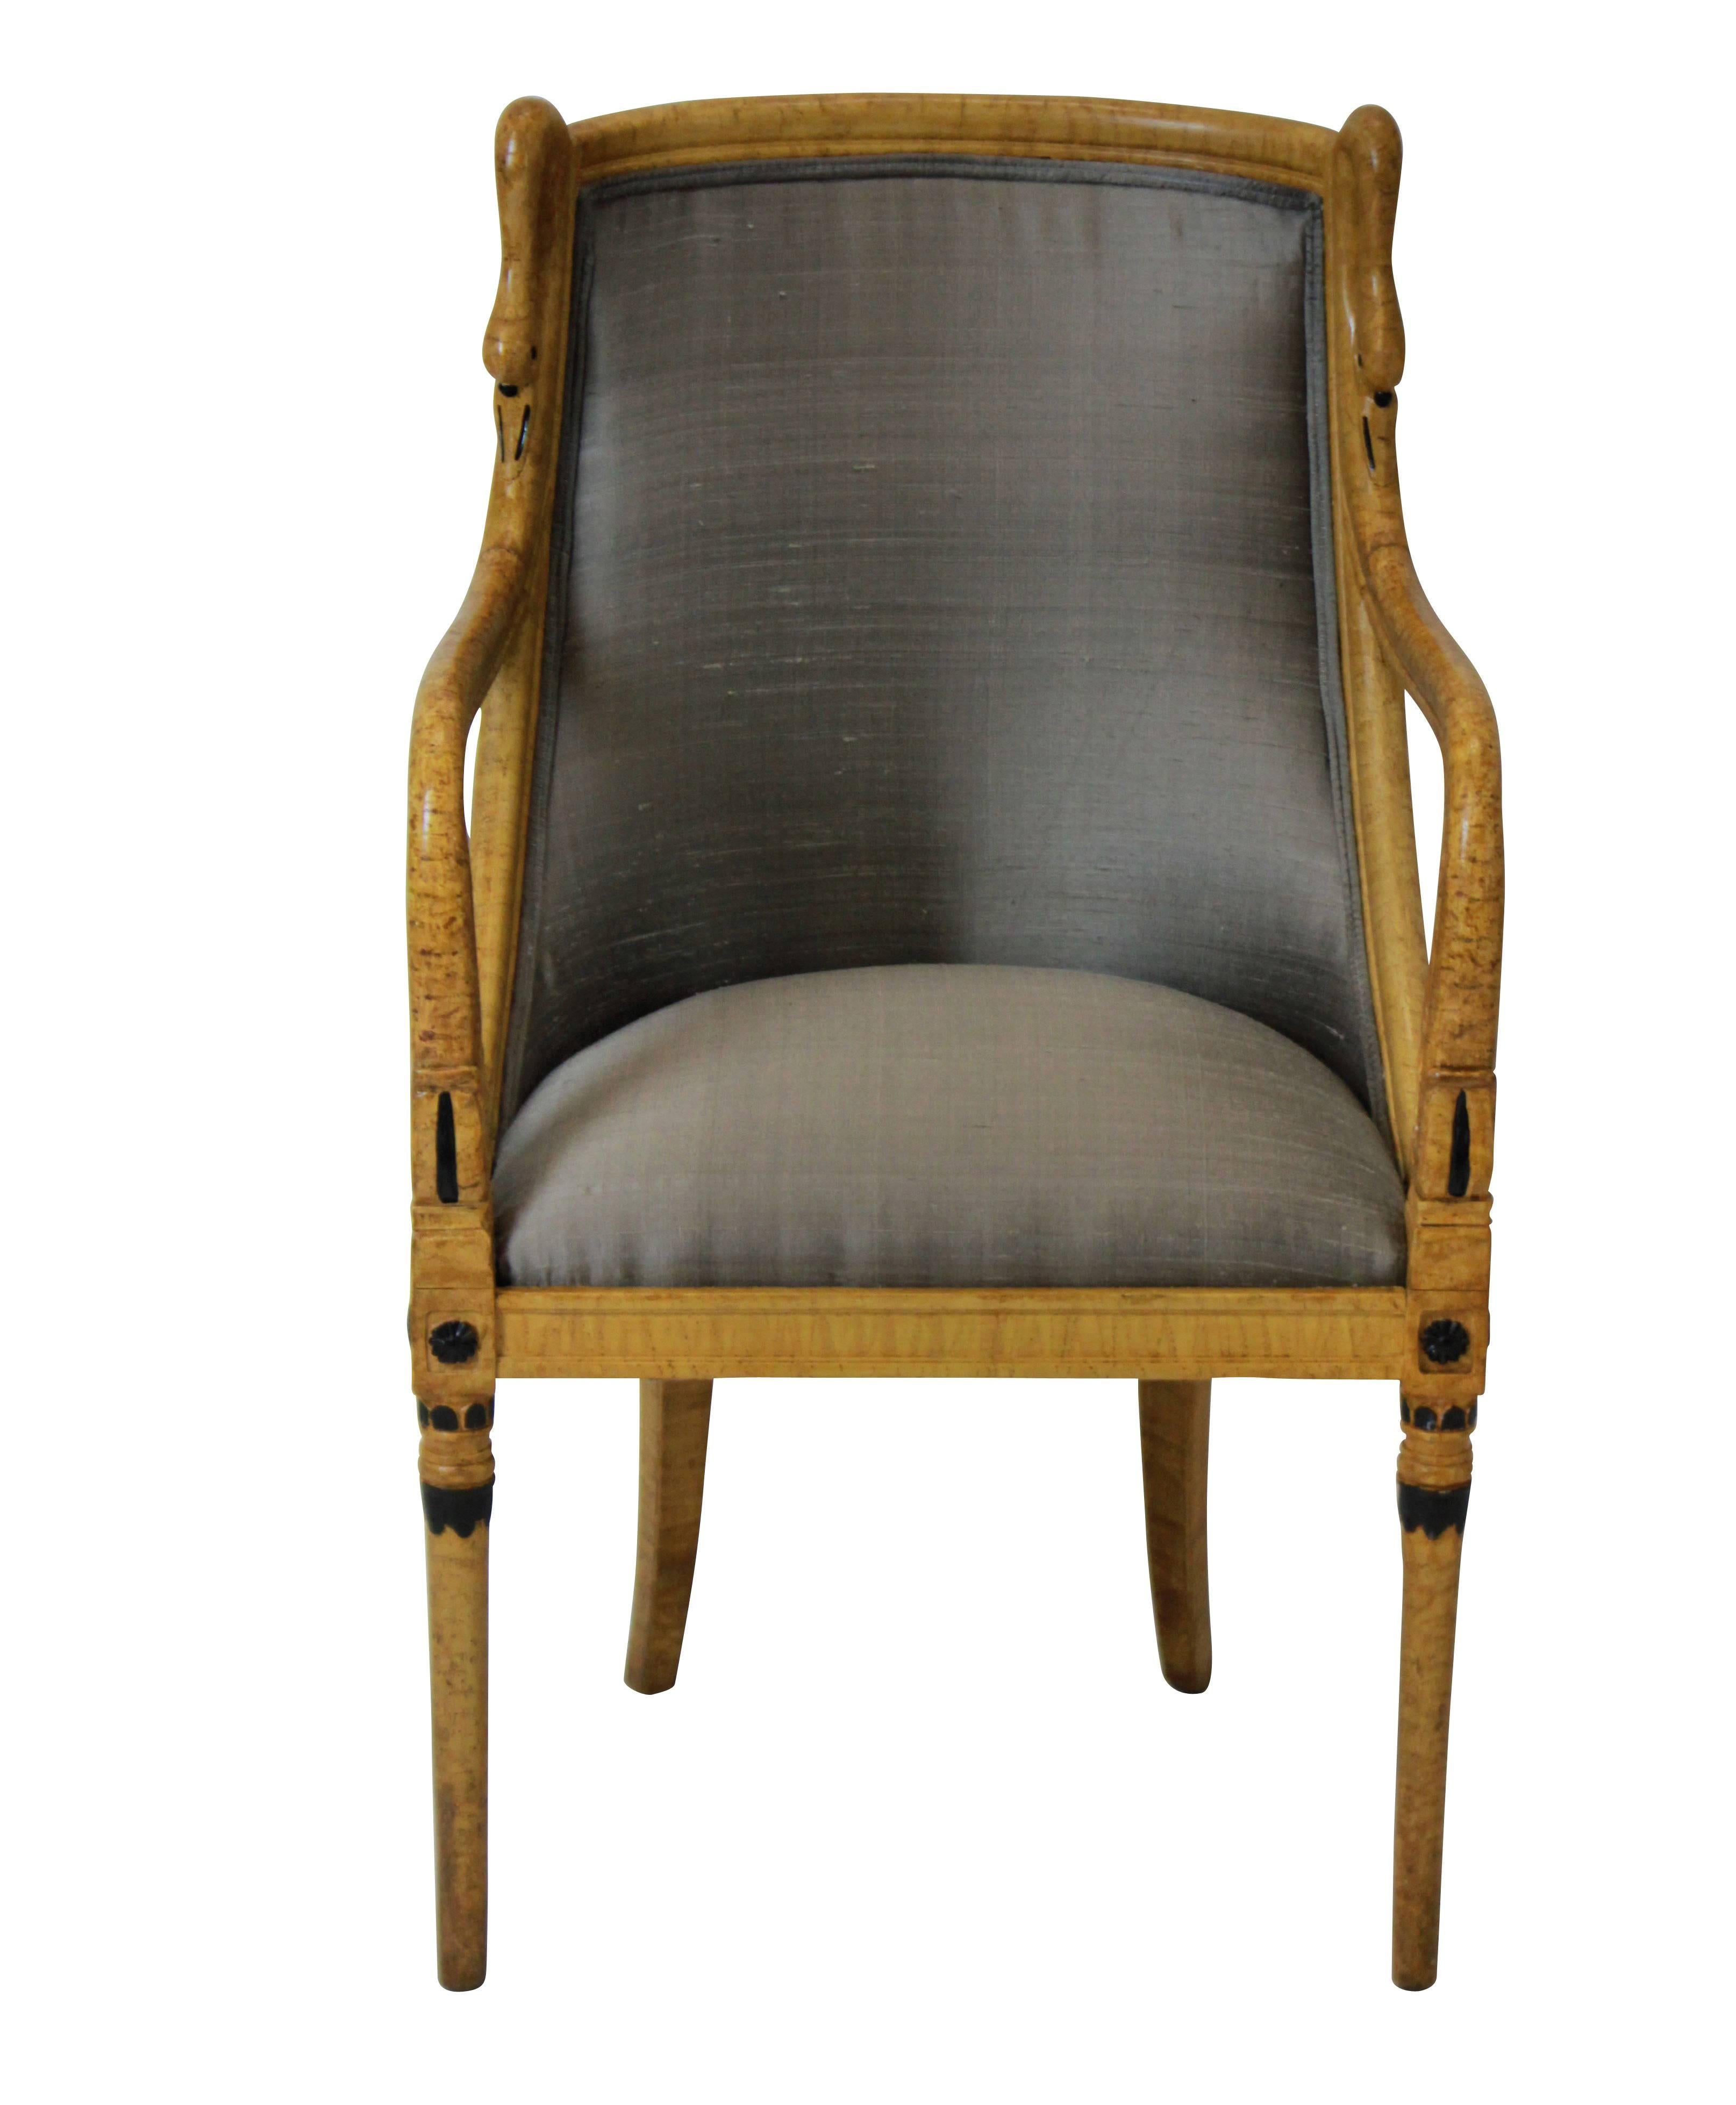 A Swedish simulated (painted) bur walnut Biedermeier swan neck desk chair. Newly restored and upholstered in stone colored dupion silk.